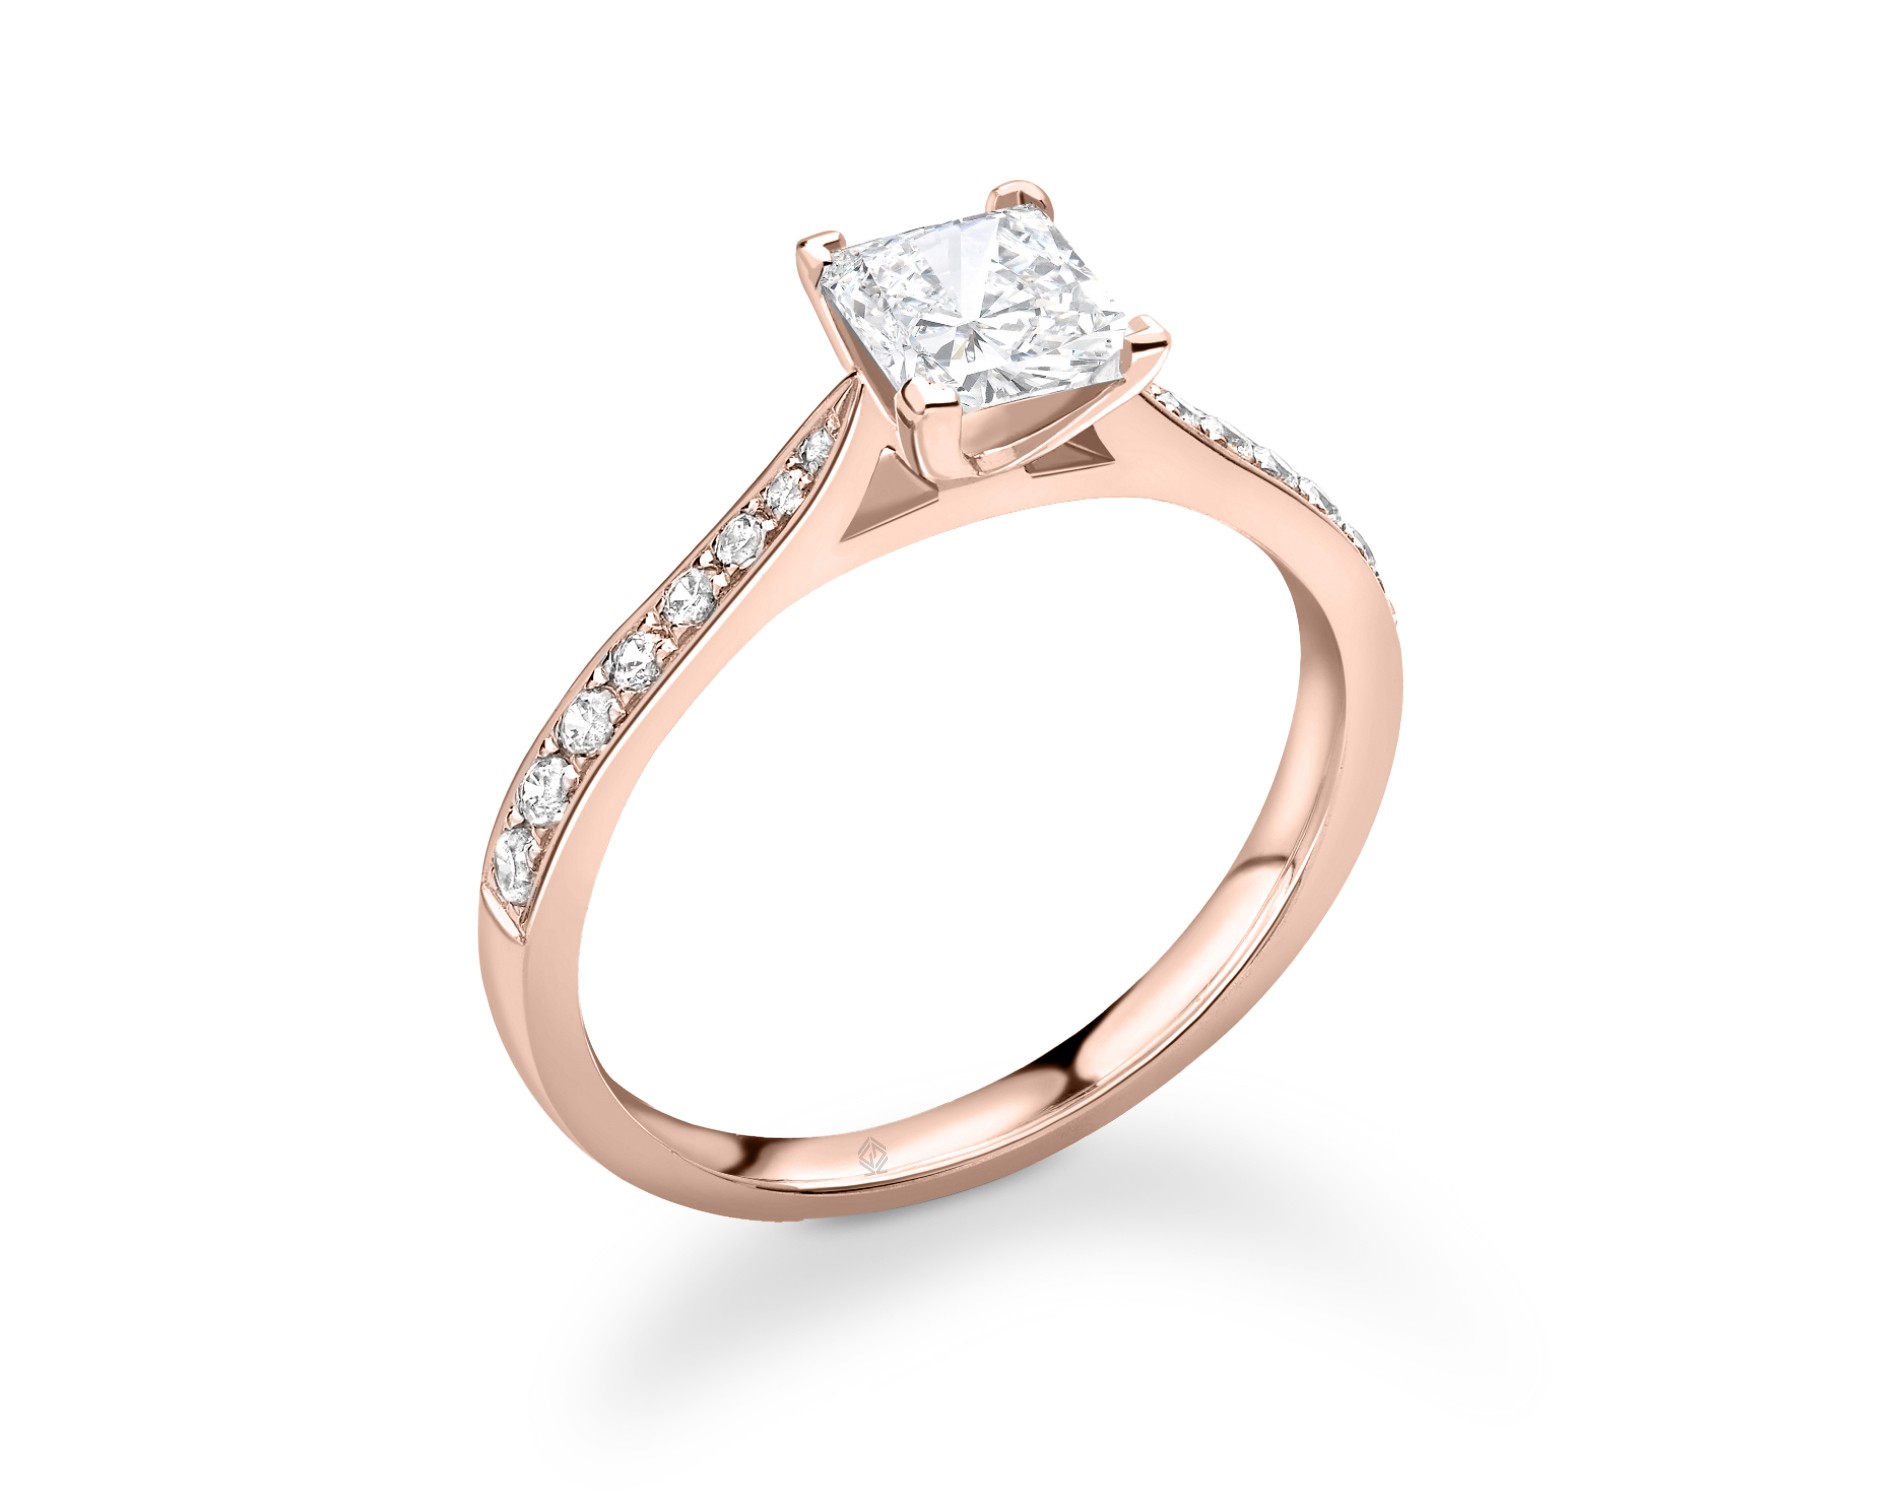 18K ROSE GOLD PRINCESS CUT DIAMOND ENGAGEMENT RING WITH SIDE STONES CHANNEL SET